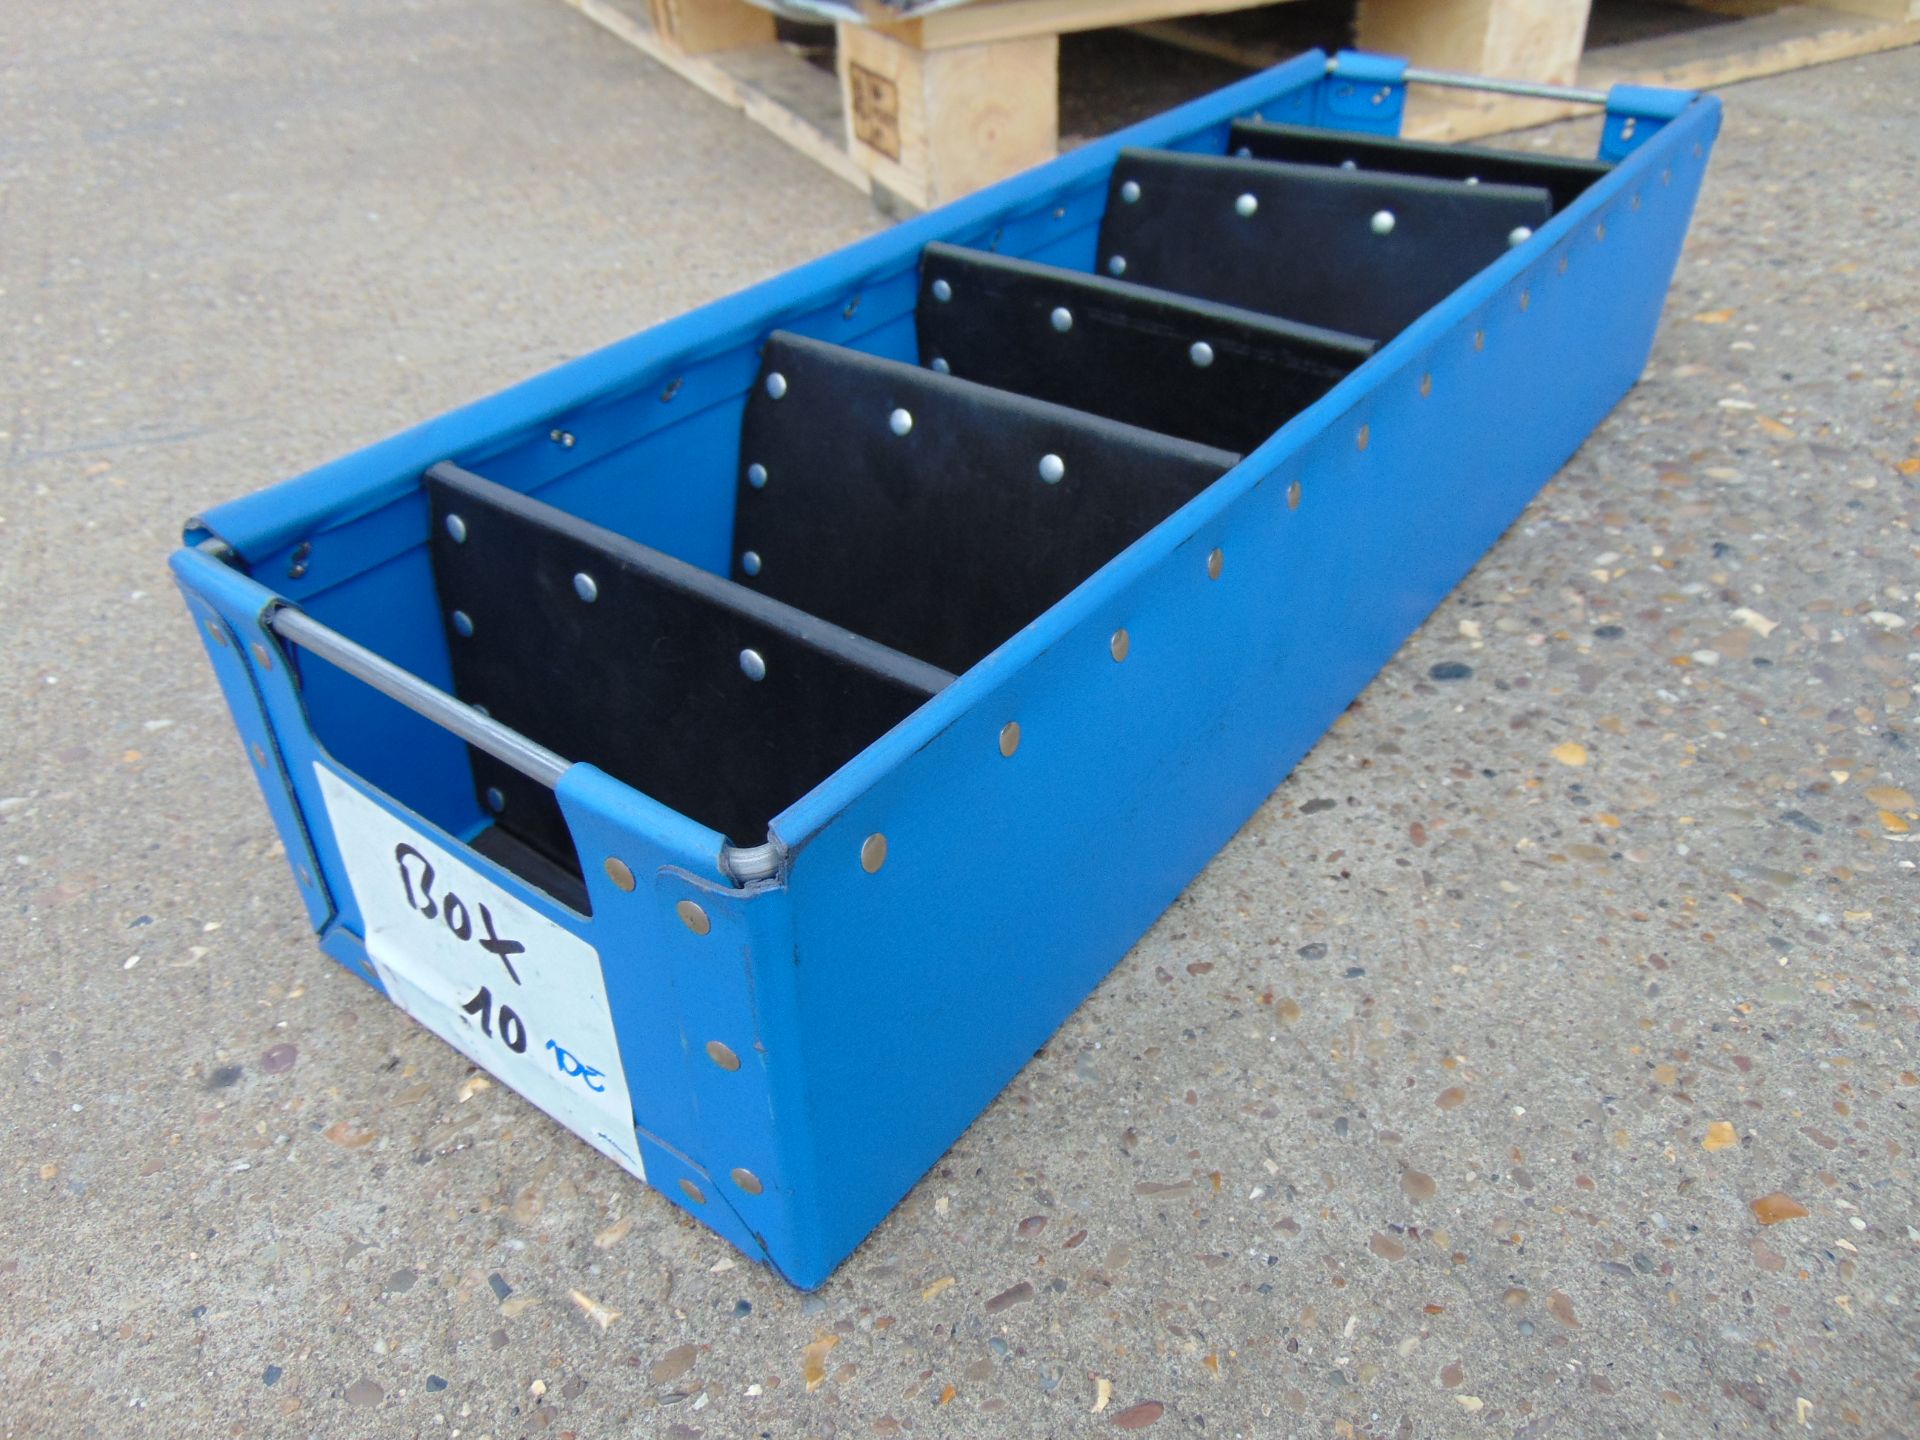 120 x Heavy Duty Tote Storage Boxes with Dividers - Image 5 of 5